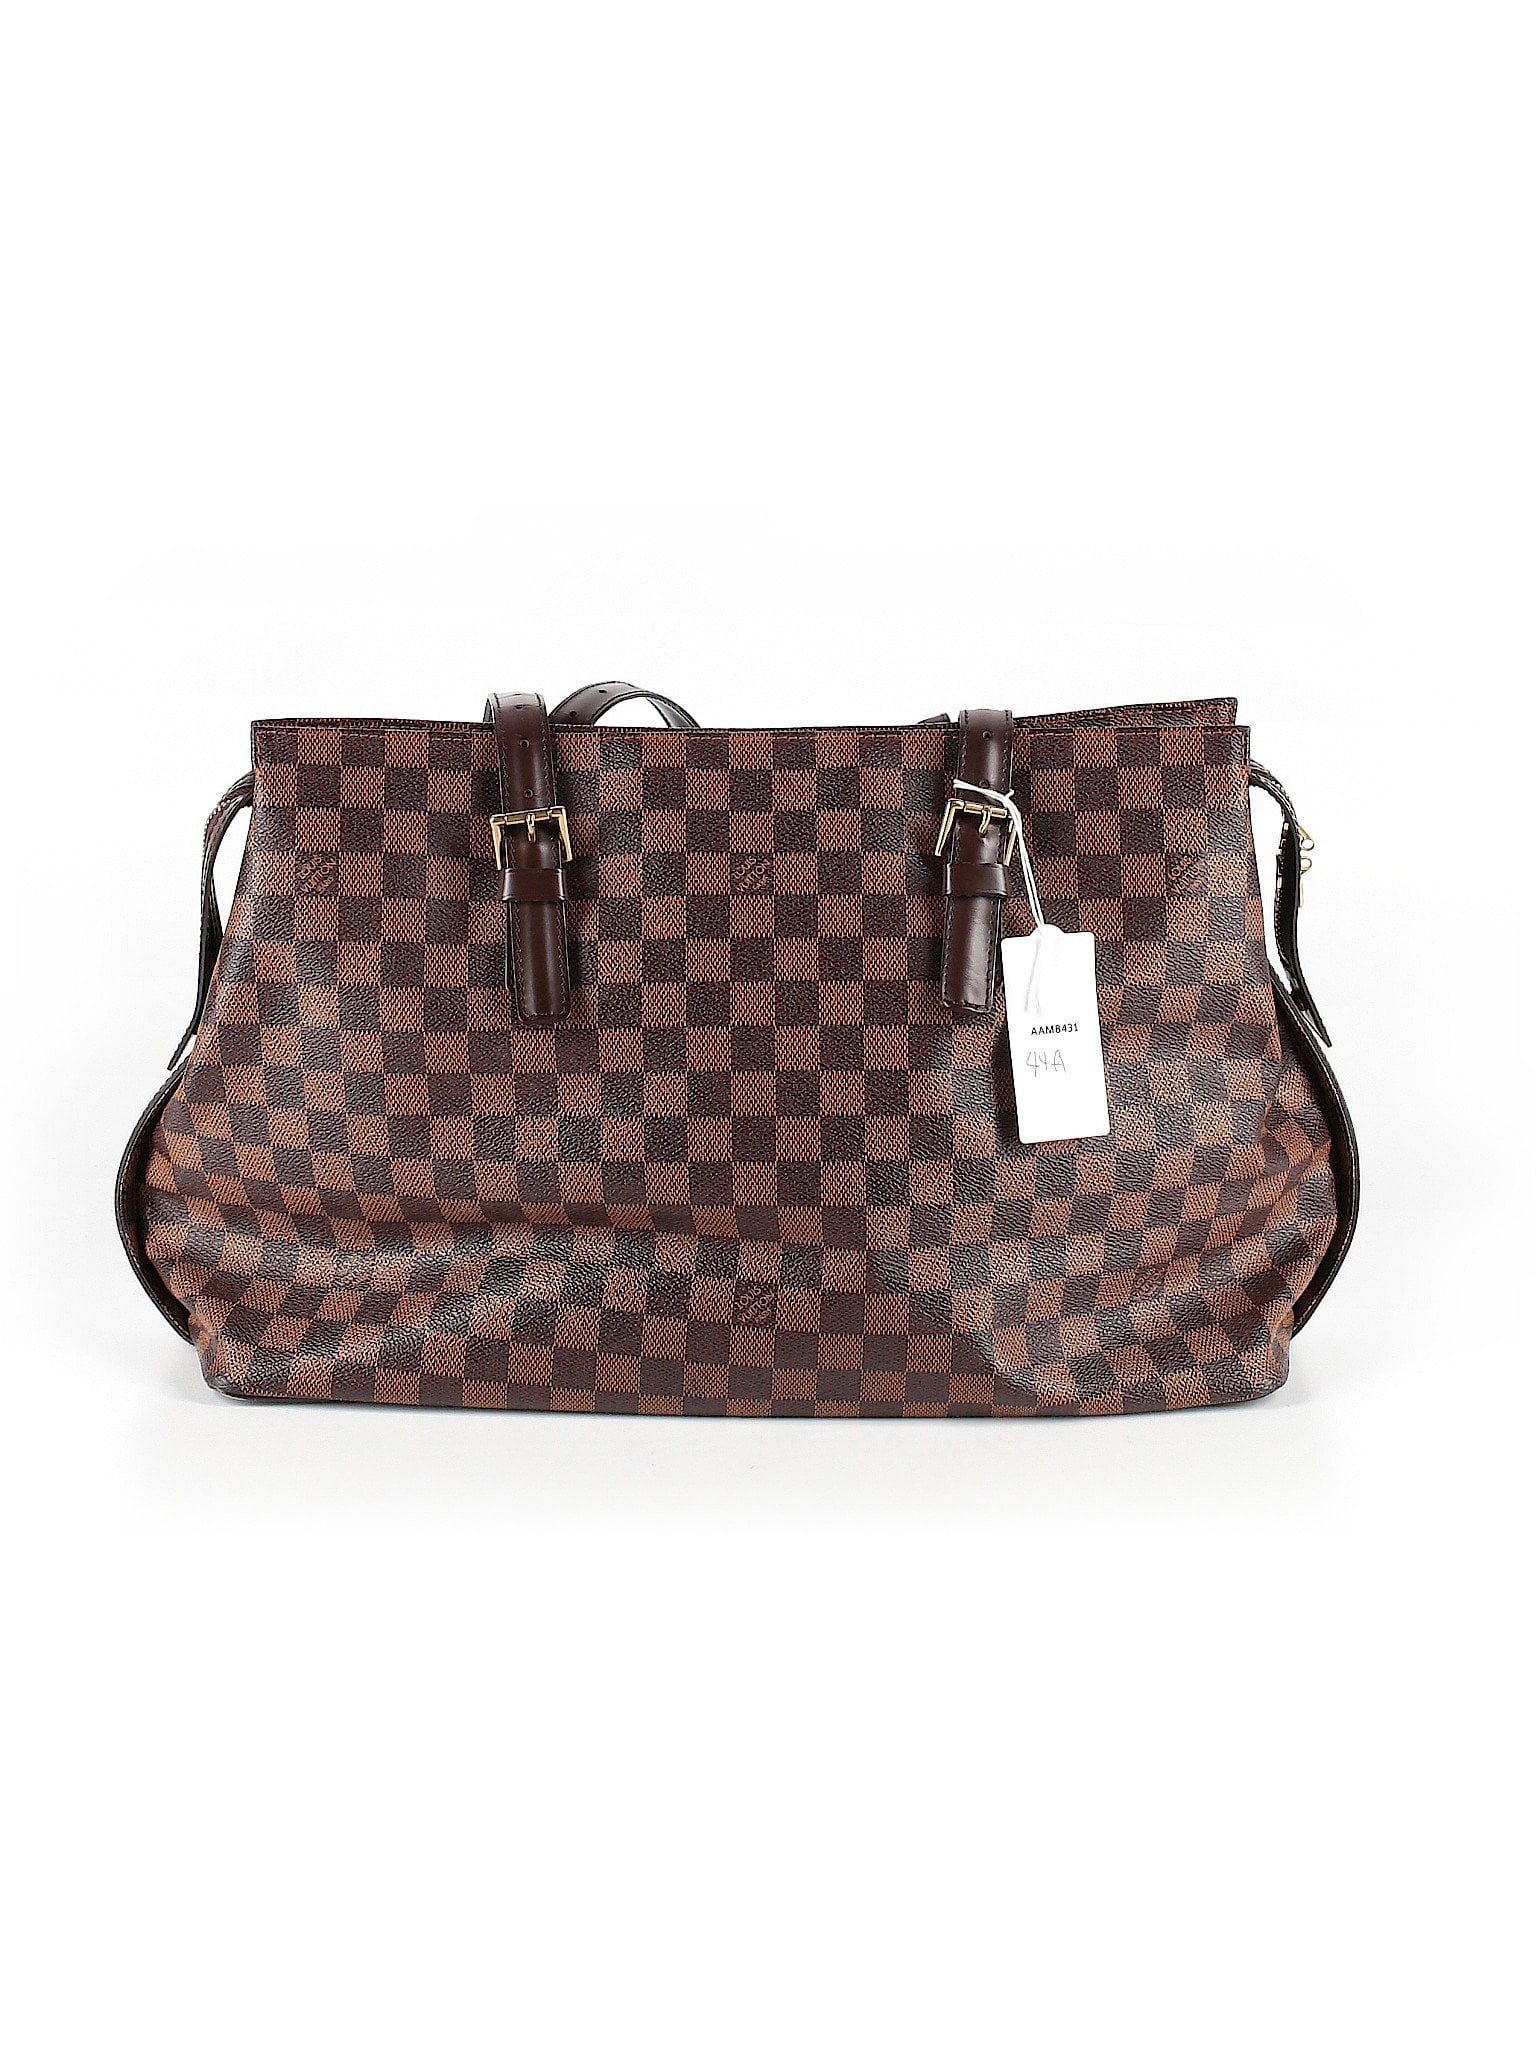 Louis Vuitton - Pre-Owned Louis Vuitton Women&#39;s One Size Fits All Tote - www.paulmartinsmith.com - www.paulmartinsmith.com